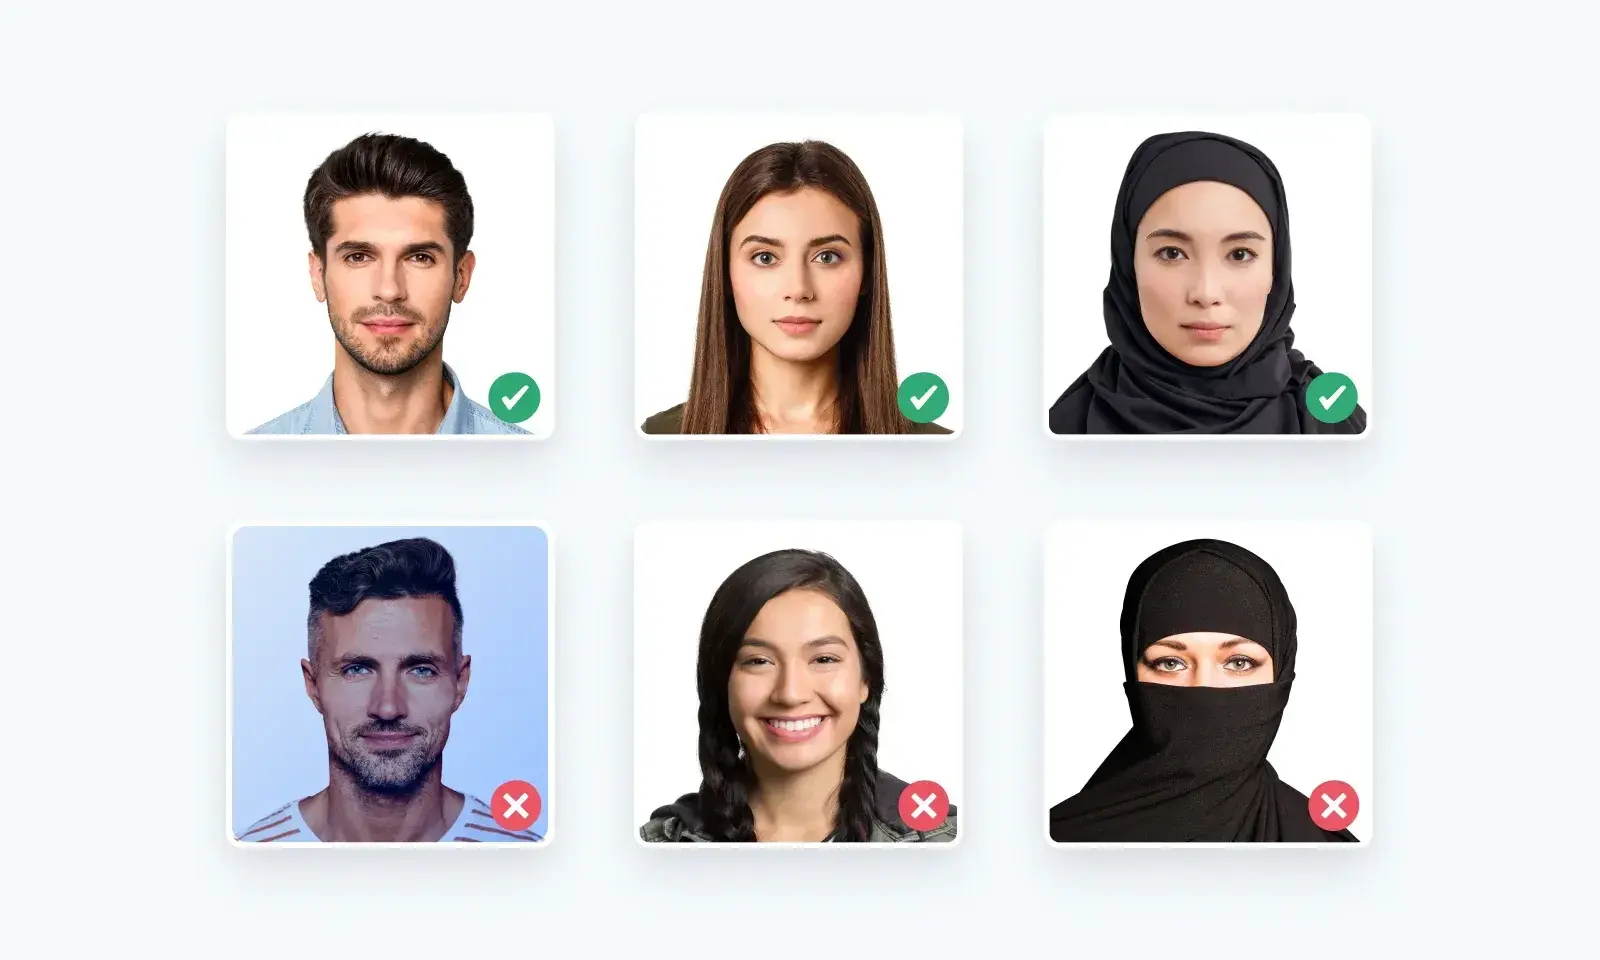 Examples of acceptable and unacceptable US visa photos.